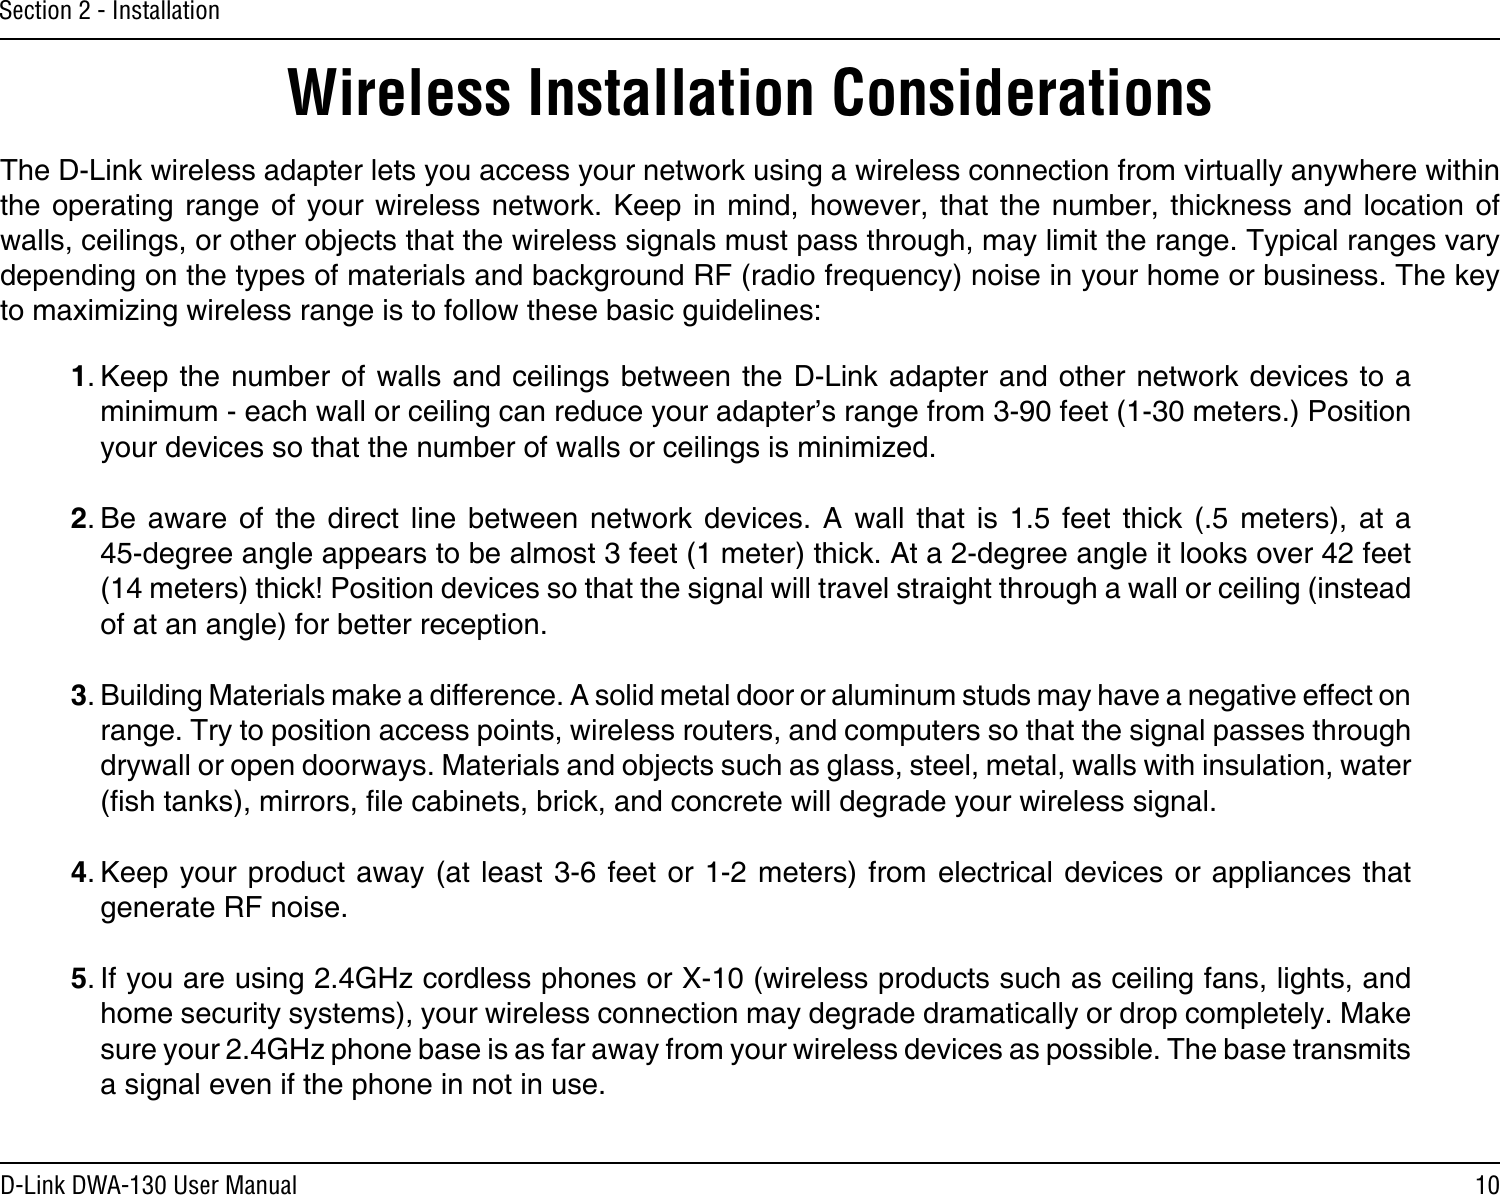 10D-Link DWA-130 User ManualSection 2 - InstallationWireless Installation ConsiderationsThe D-Link wireless adapter lets you access your network using a wireless connection from virtually anywhere within the operating  range  of your wireless  network.  Keep in mind,  however,  that the  number,  thickness  and location  of walls, ceilings, or other objects that the wireless signals must pass through, may limit the range. Typical ranges vary depending on the types of materials and background RF (radio frequency) noise in your home or business. The key to maximizing wireless range is to follow these basic guidelines:1. Keep the number of walls and  ceilings between the D-Link adapter and other network devices  to a minimum - each wall or ceiling can reduce your adapter’s range from 3-90 feet (1-30 meters.) Position your devices so that the number of walls or ceilings is minimized.2. Be aware  of  the  direct  line  between  network  devices.  A  wall  that  is  1.5  feet  thick  (.5  meters),  at  a   45-degree angle appears to be almost 3 feet (1 meter) thick. At a 2-degree angle it looks over 42 feet (14 meters) thick! Position devices so that the signal will travel straight through a wall or ceiling (instead of at an angle) for better reception.3. Building Materials make a difference. A solid metal door or aluminum studs may have a negative effect on range. Try to position access points, wireless routers, and computers so that the signal passes through drywall or open doorways. Materials and objects such as glass, steel, metal, walls with insulation, water (sh tanks), mirrors, le cabinets, brick, and concrete will degrade your wireless signal.4. Keep your  product away  (at least  3-6 feet  or 1-2  meters) from  electrical devices  or appliances  that generate RF noise.5. If you are using 2.4GHz cordless phones or X-10 (wireless products such as ceiling fans, lights, and home security systems), your wireless connection may degrade dramatically or drop completely. Make sure your 2.4GHz phone base is as far away from your wireless devices as possible. The base transmits a signal even if the phone in not in use.